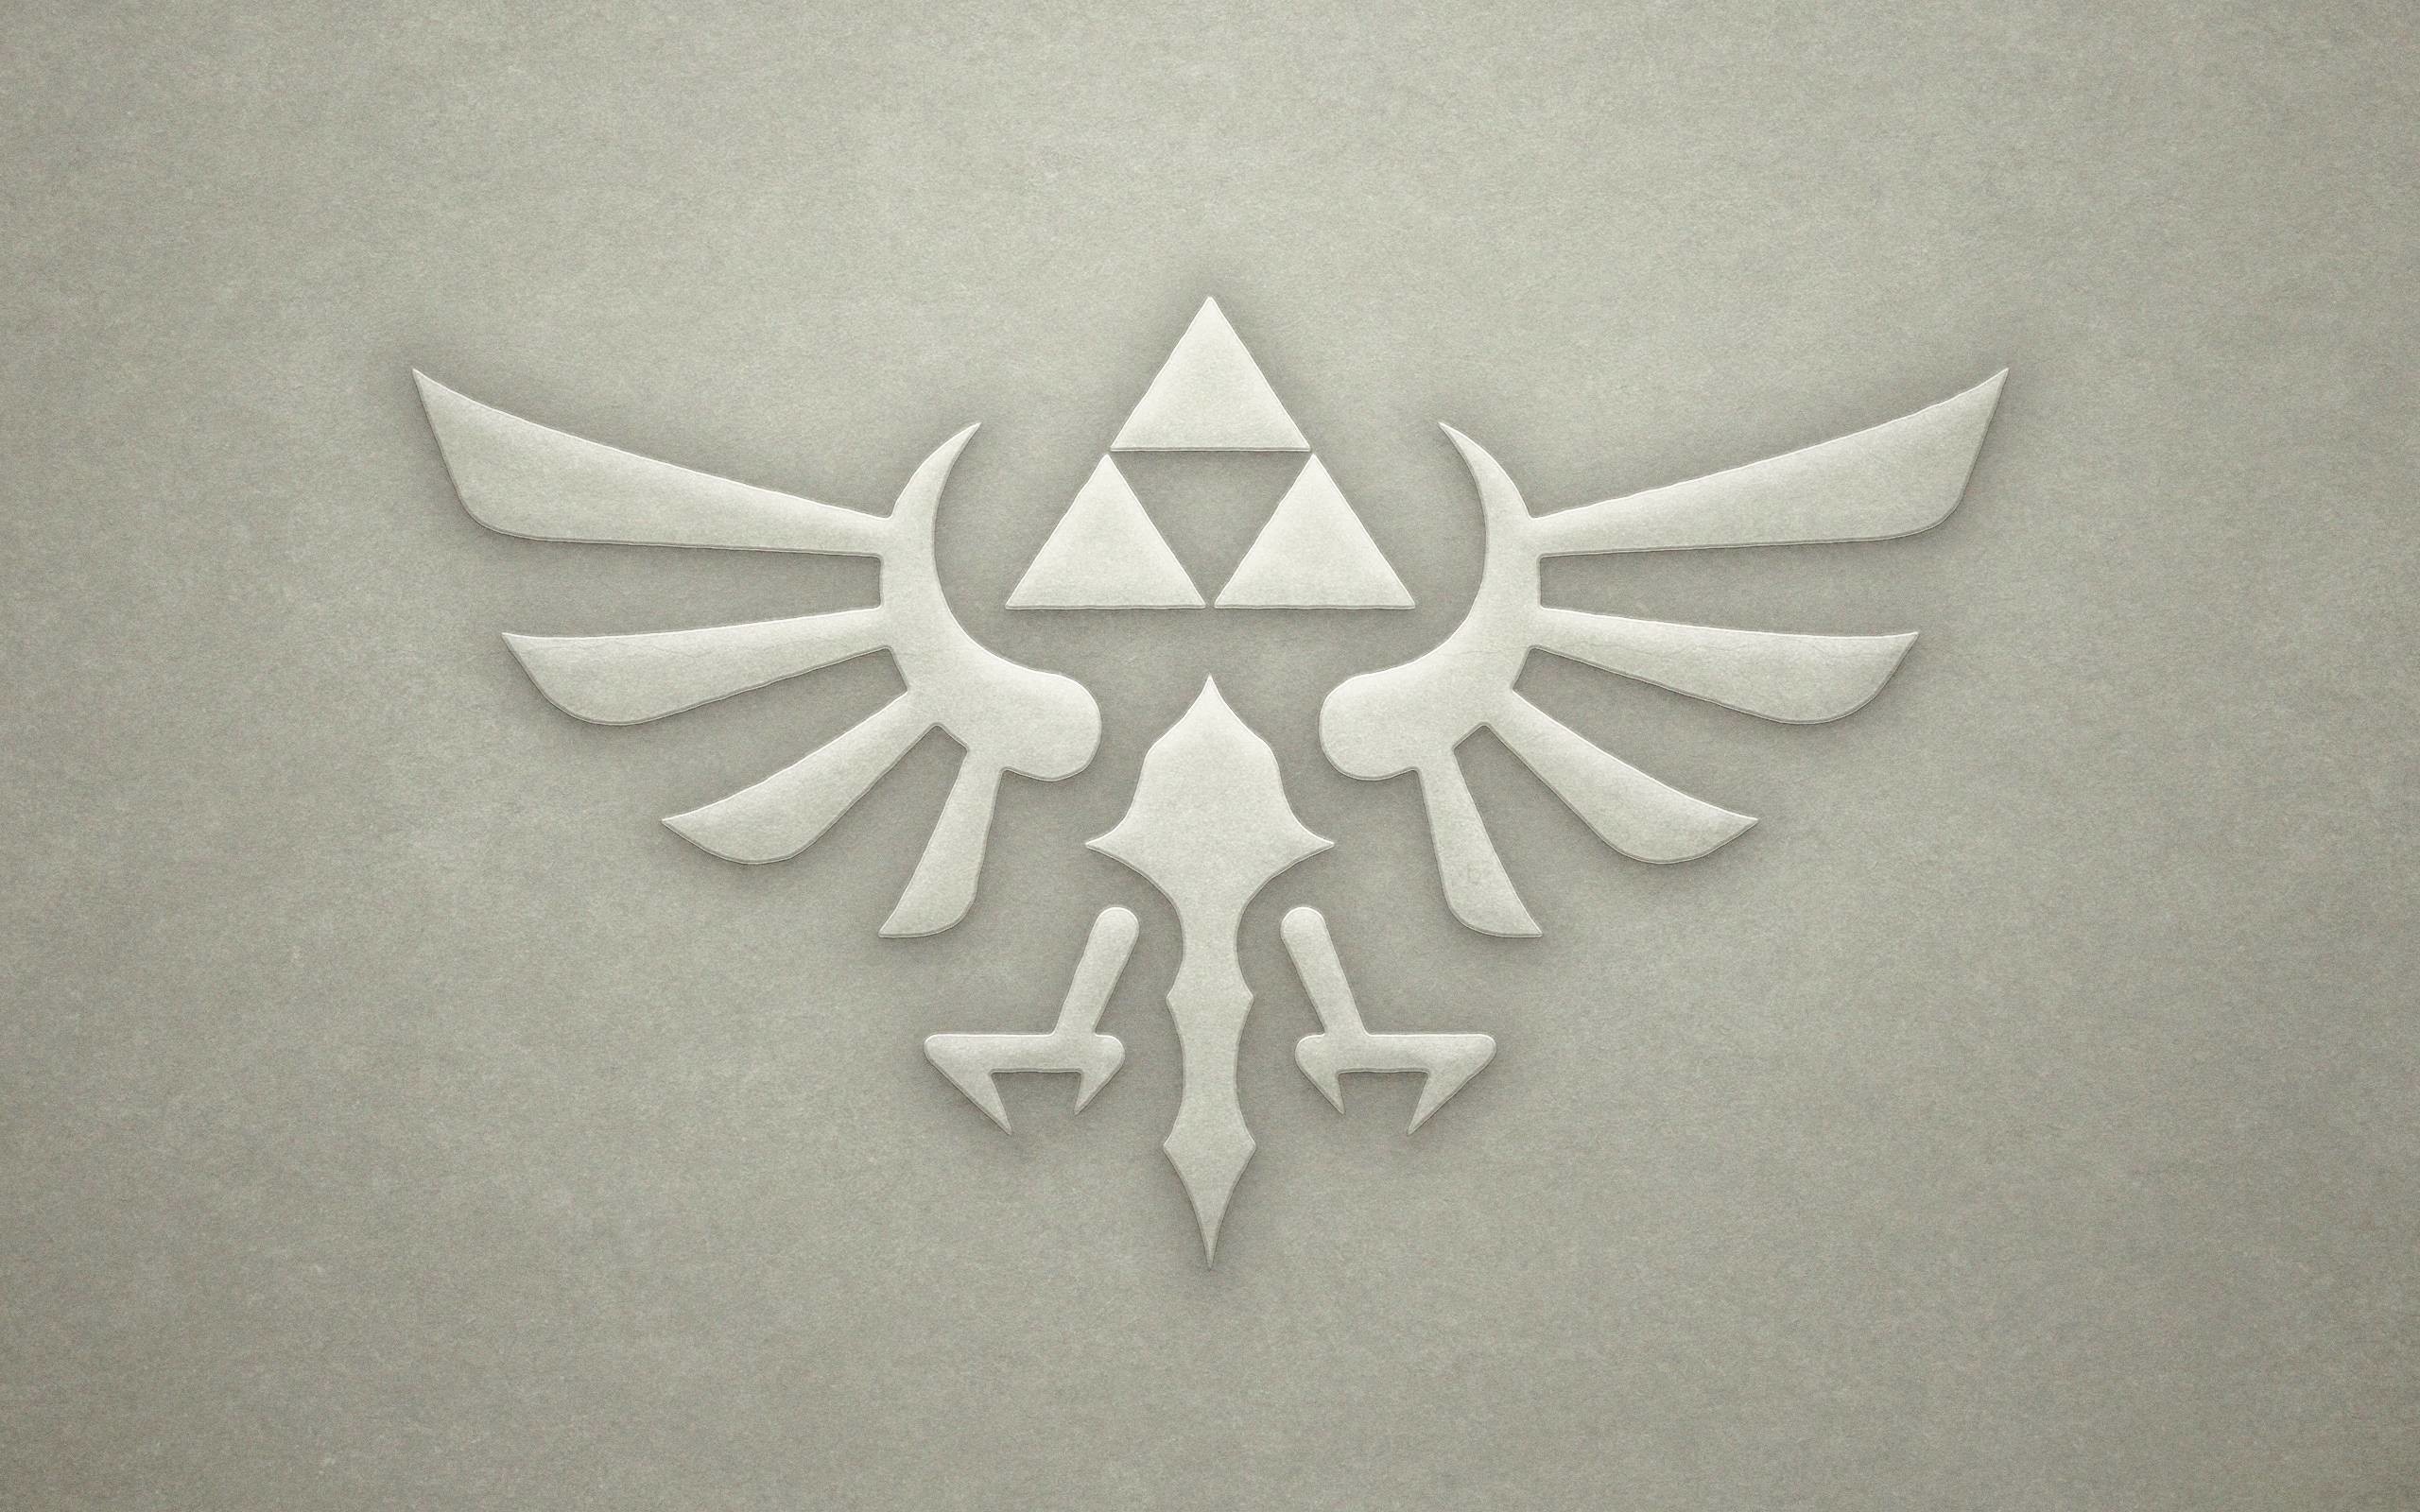 2560x1600 Found an awesome Hyrule Crest wallpaper!